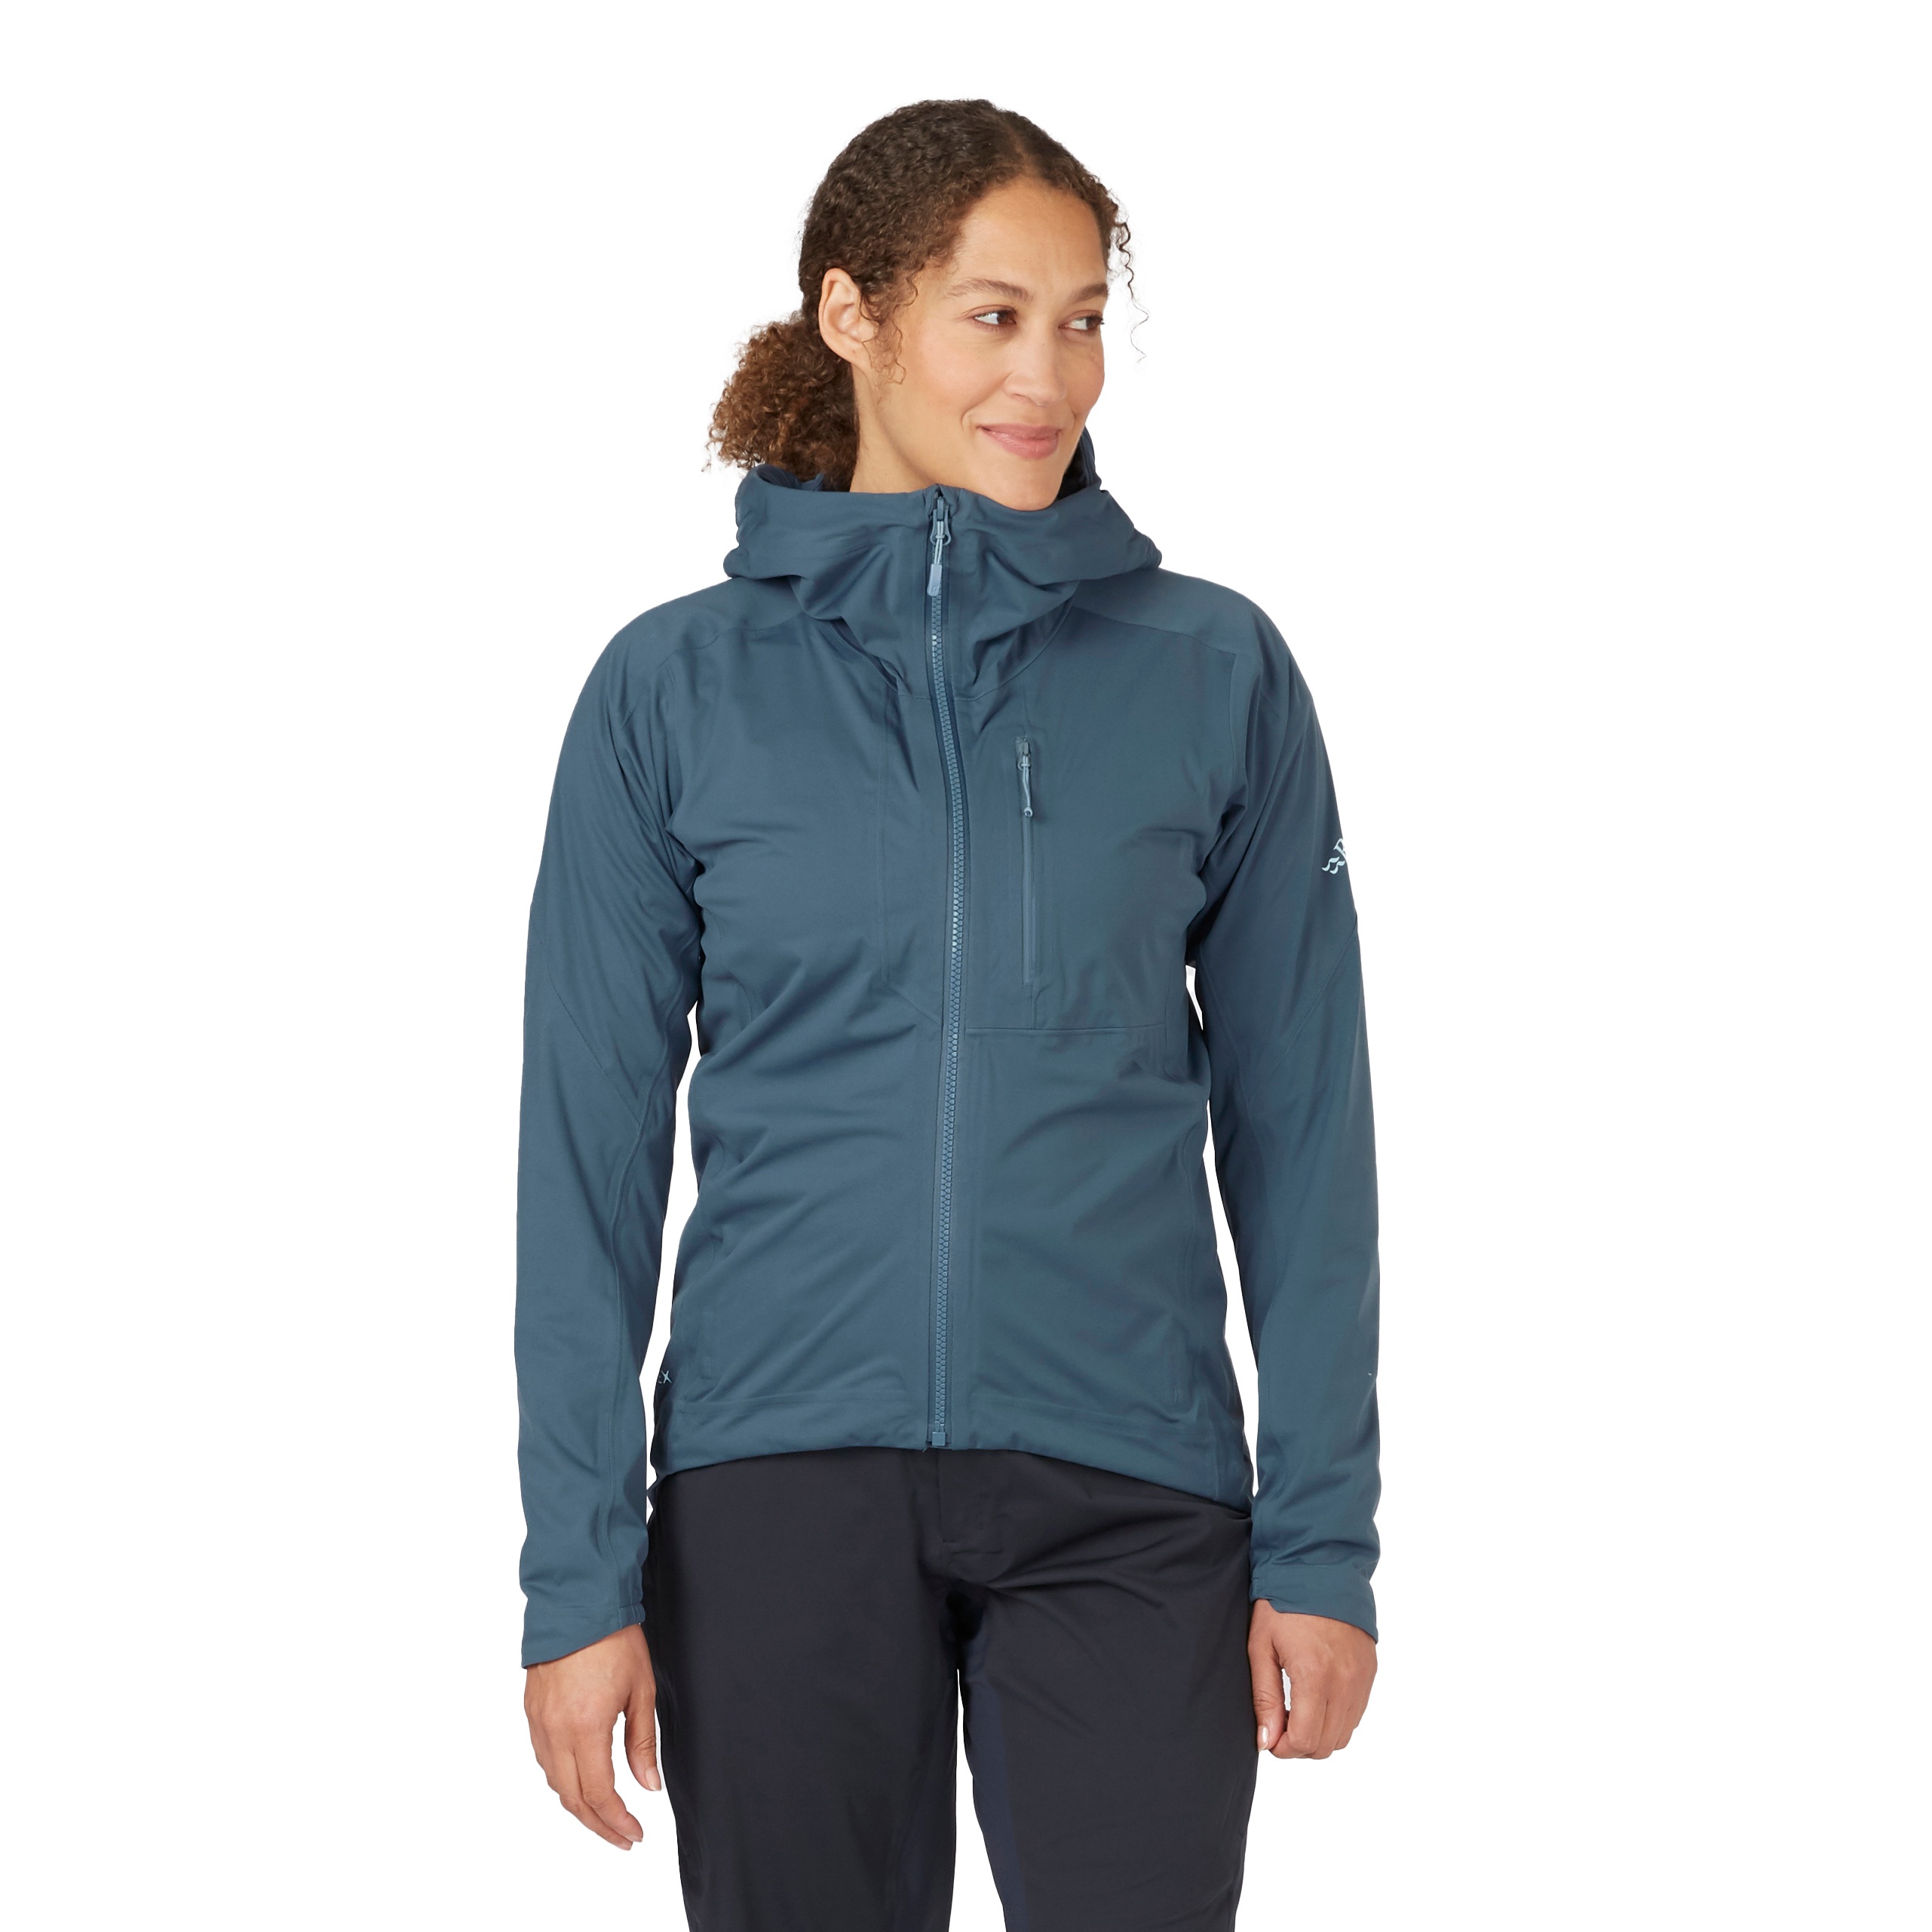 Picture of Rab Cinder Kinetic Jacket Women - orion blue